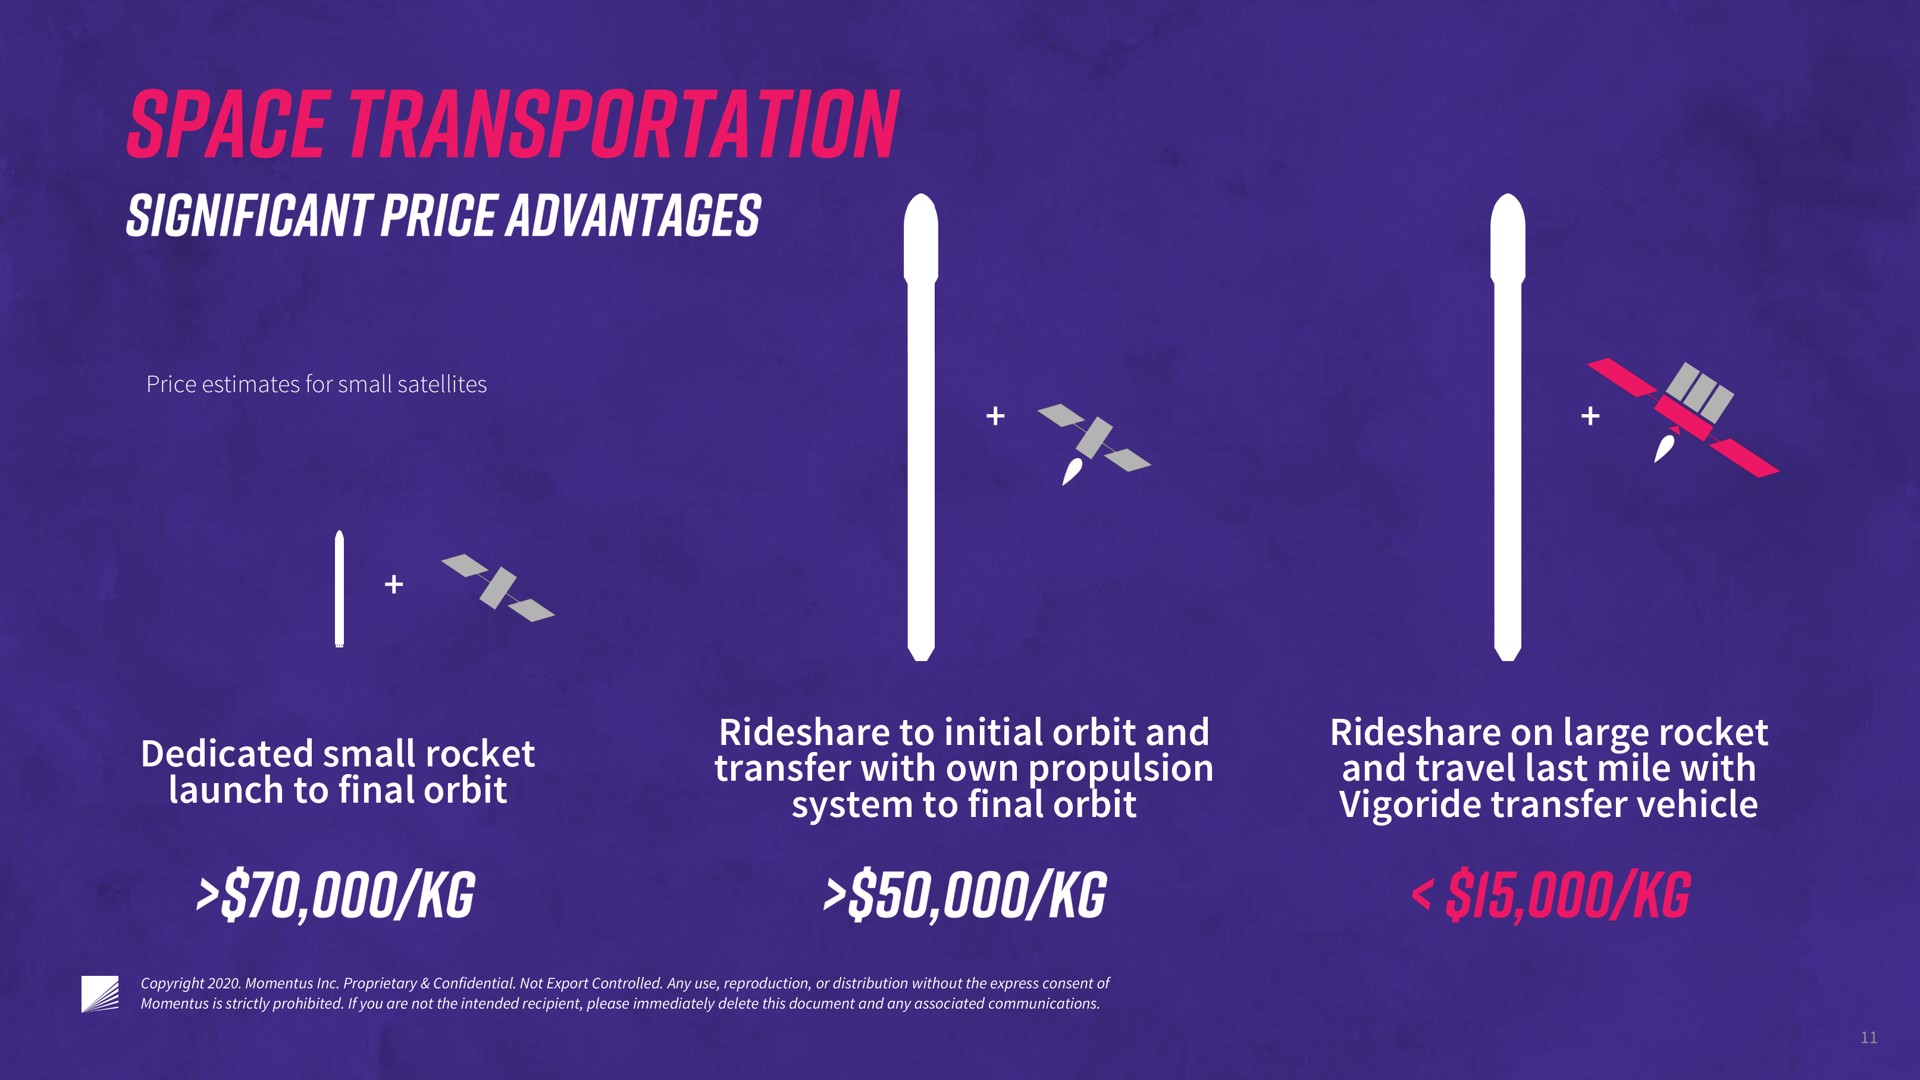 dedicated small rocket launch to final orbit to initial orbit and transfer with own propulsion system to final orbit on large rocket and travel last mile with transfer vehicle | Momentus